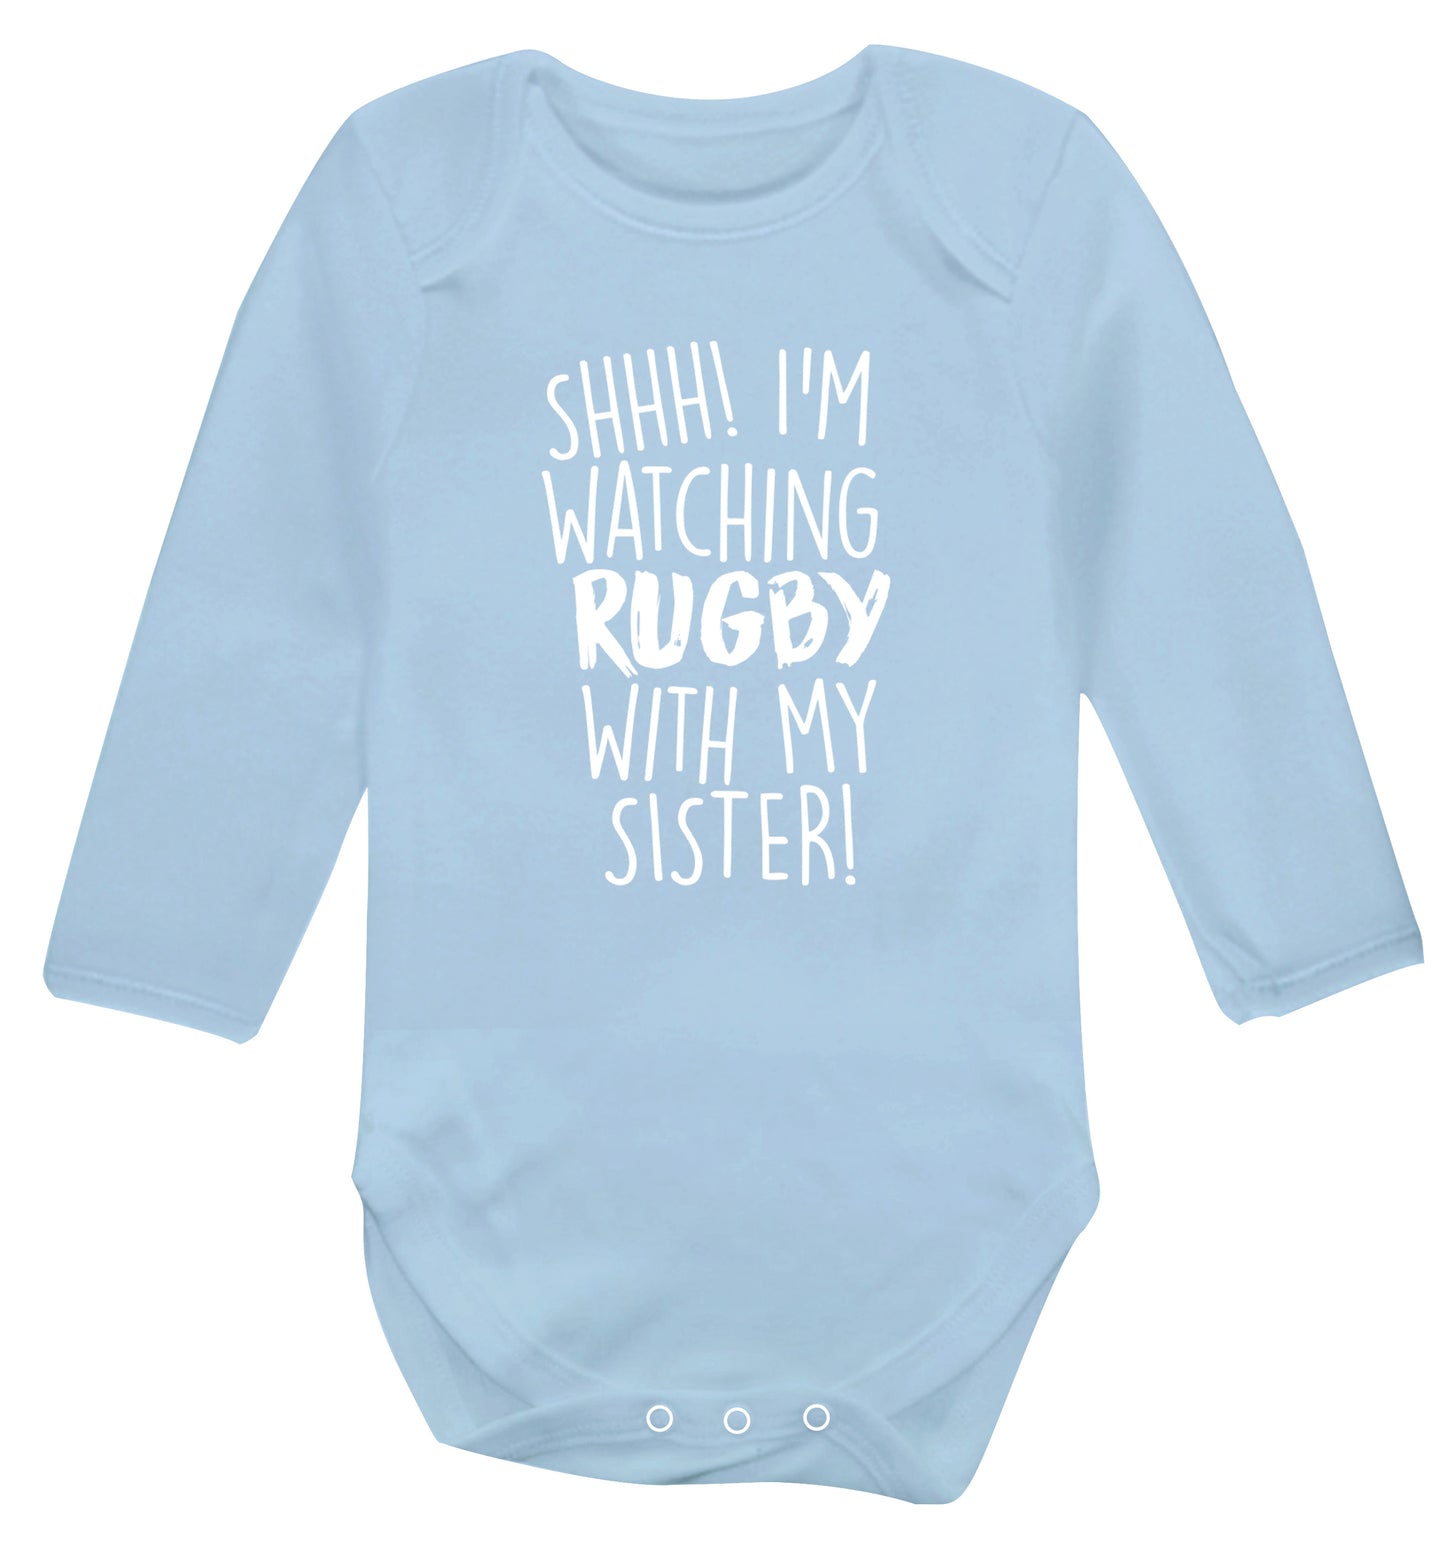 Shh... I'm watching rugby with my sister Baby Vest long sleeved pale blue 6-12 months